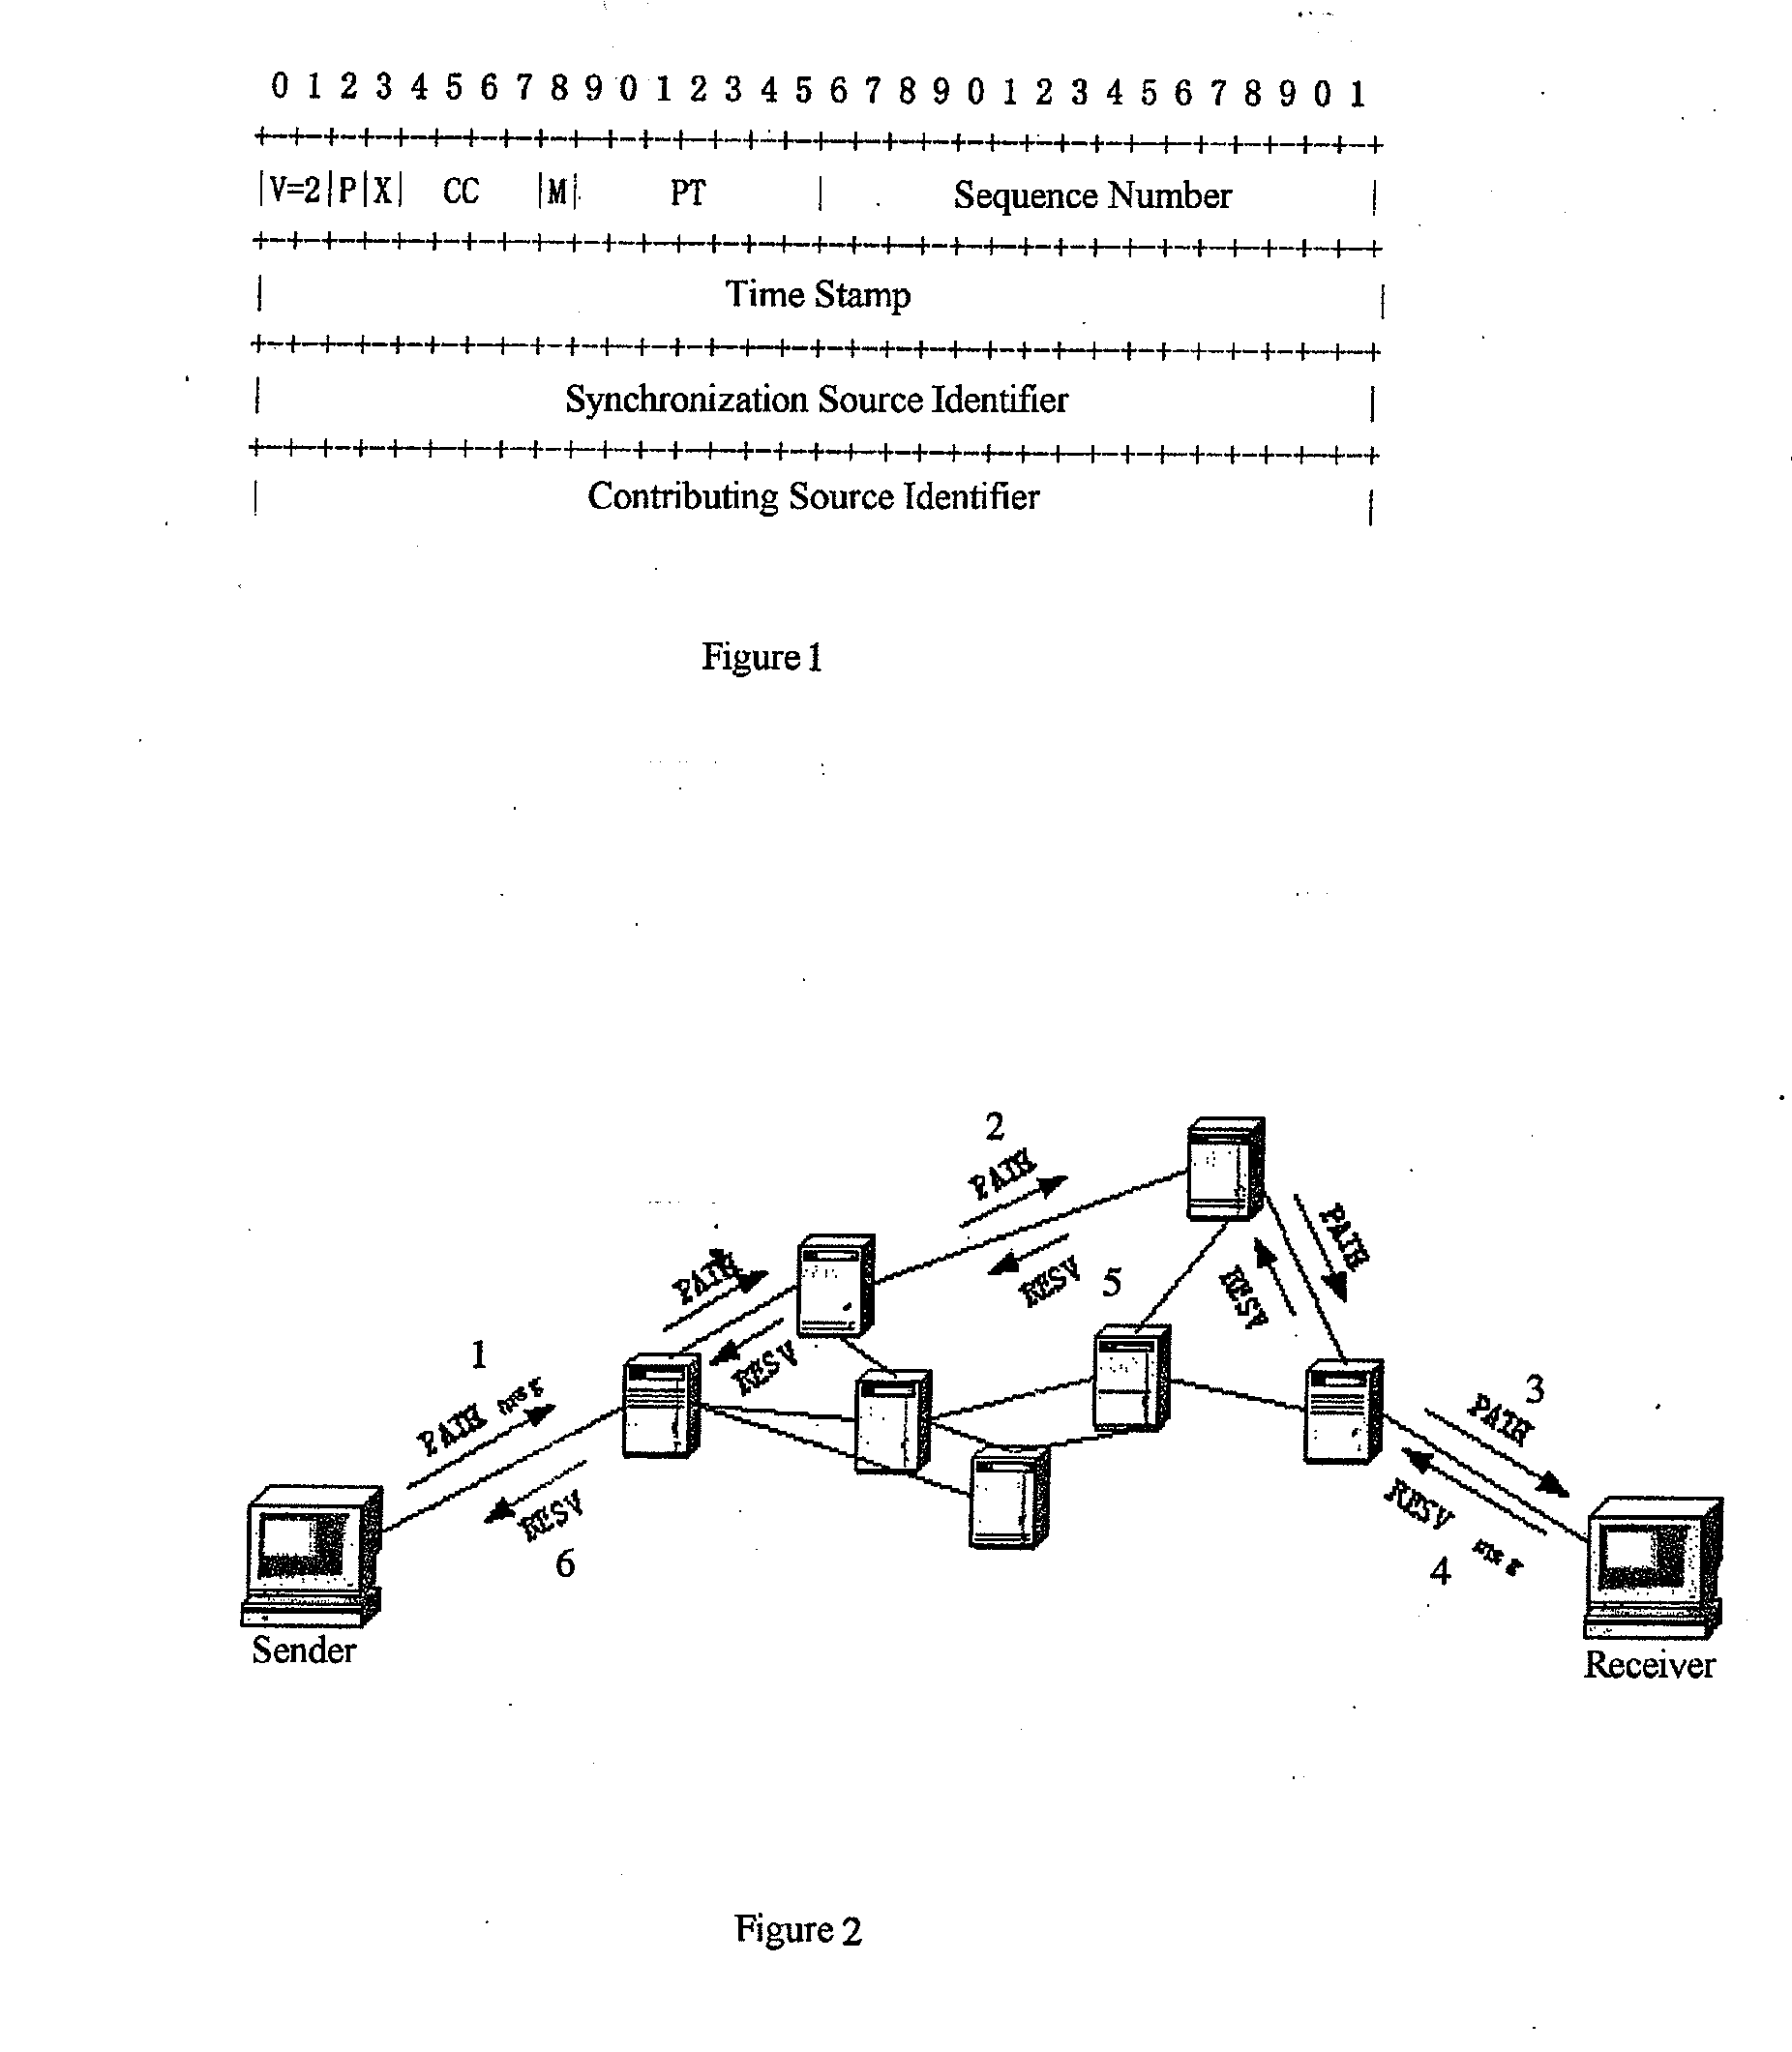 Method for Identifying Real-Time Traffic Hop by Hop in an Internet Network